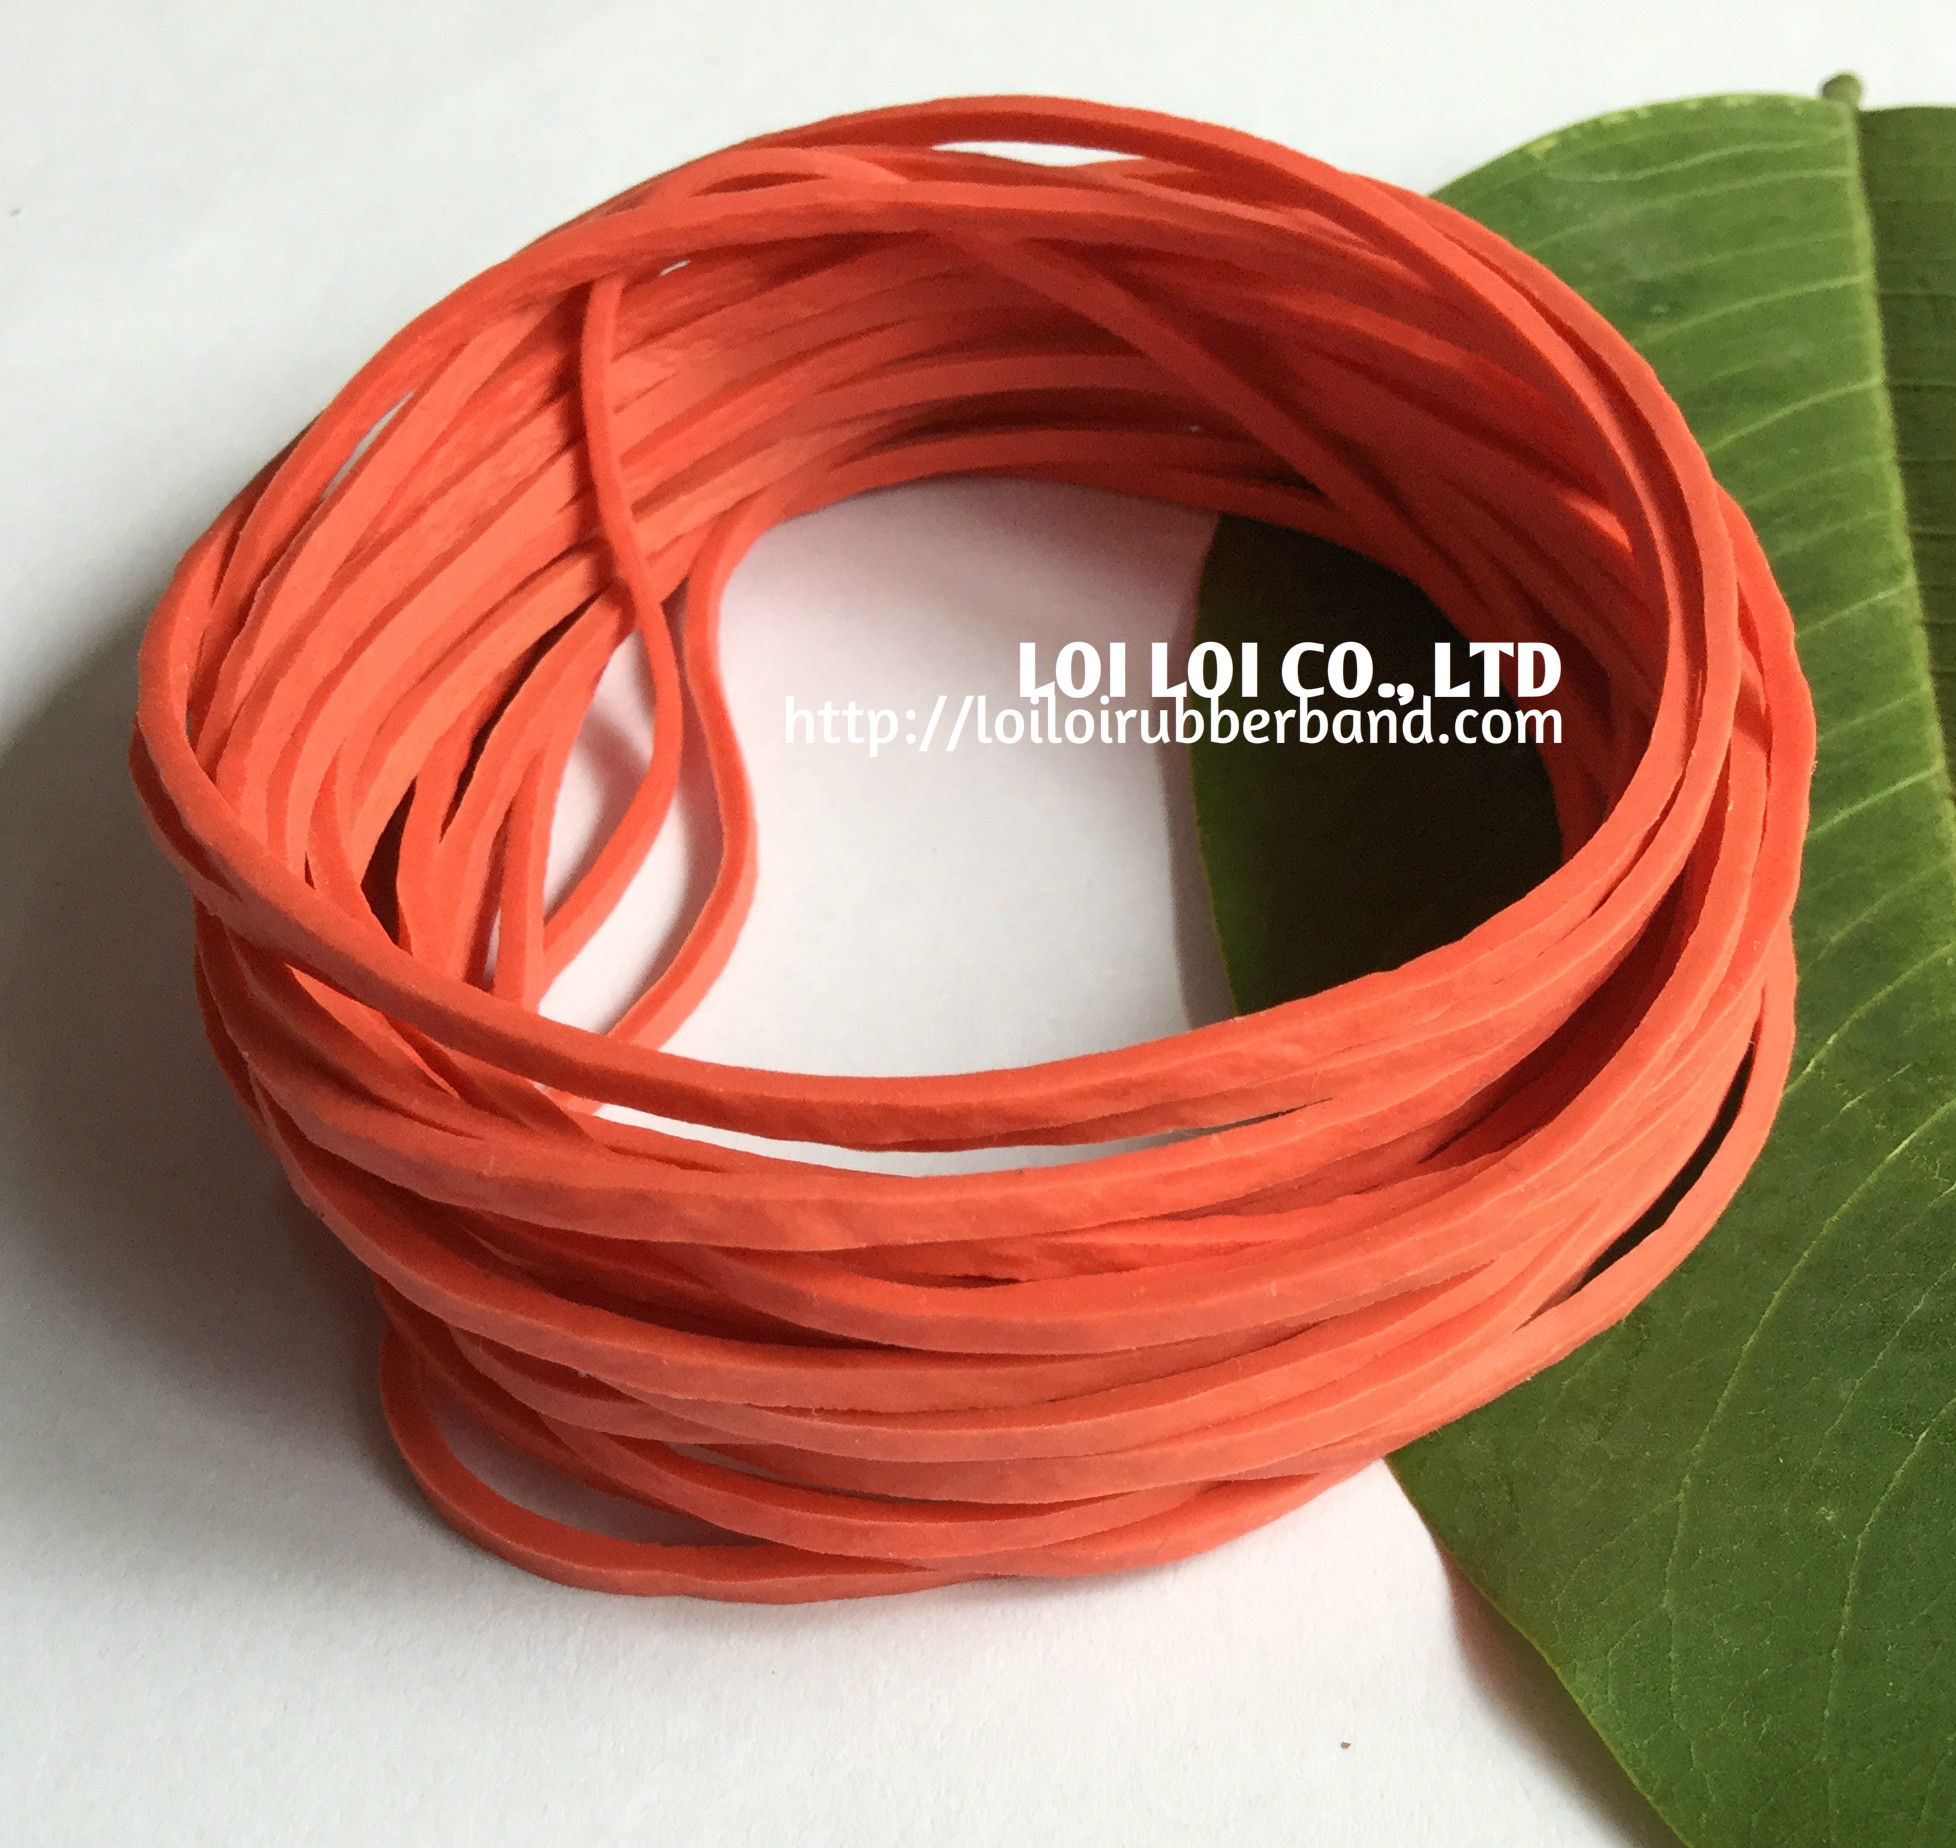 Large Super Red latex rubber band for sale / Hot item Rubber Bands Custom Molding Seals cheap price with strong quality durable